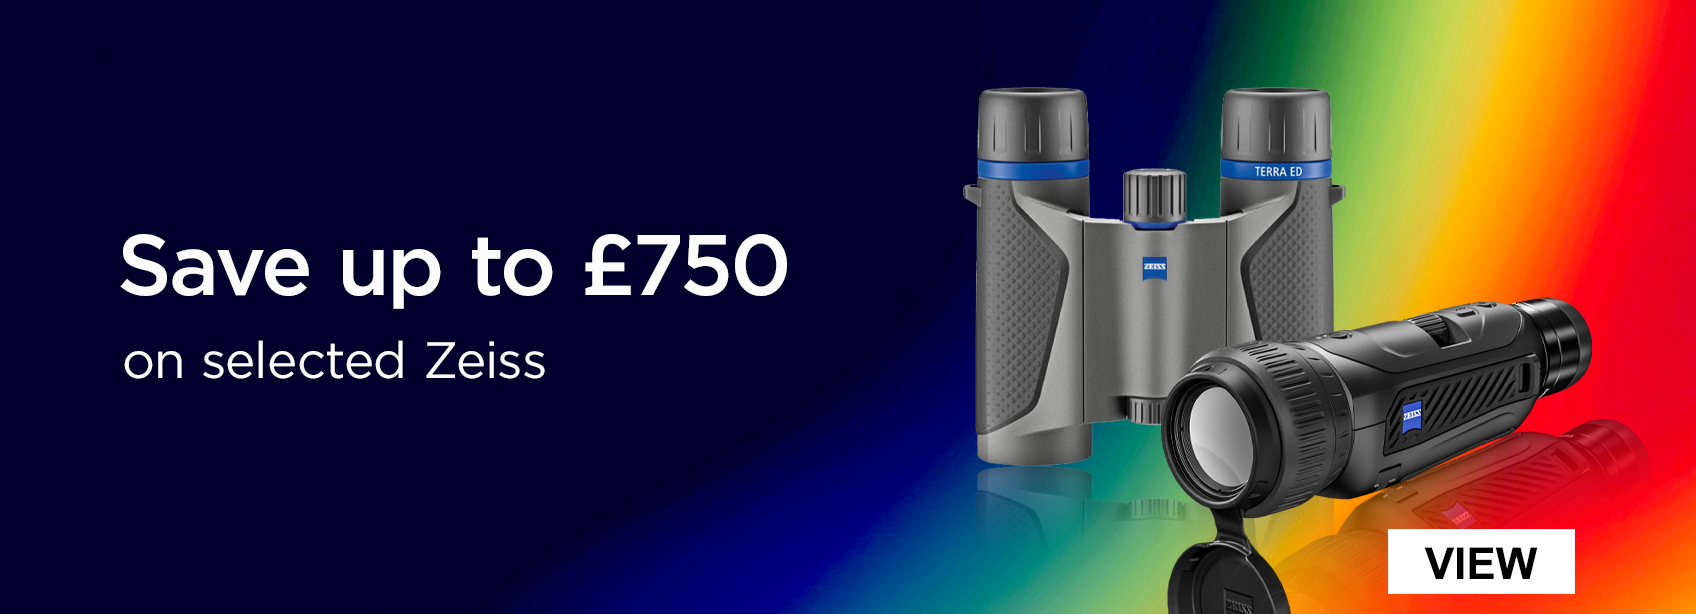 Save up to £750 on selected Zeiss